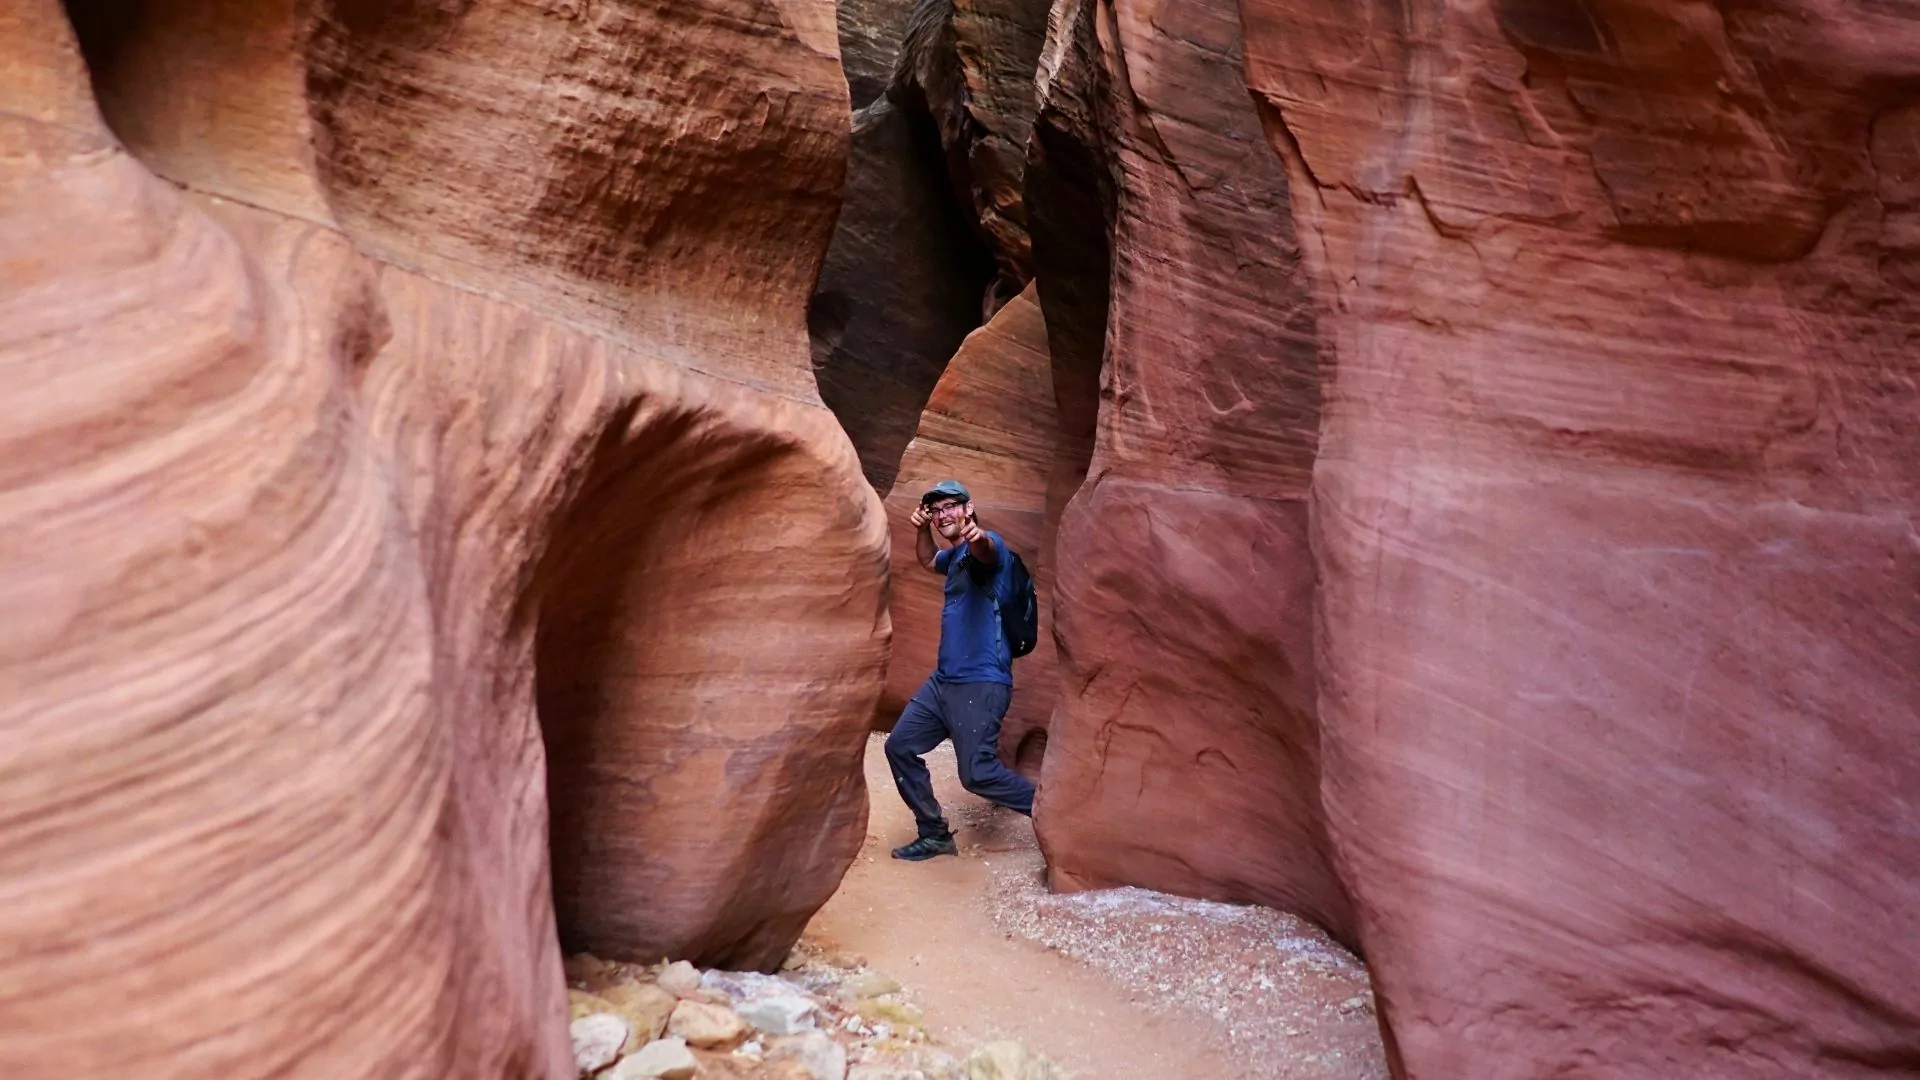 The author poses in a narrow slot canyon pointing at the camera